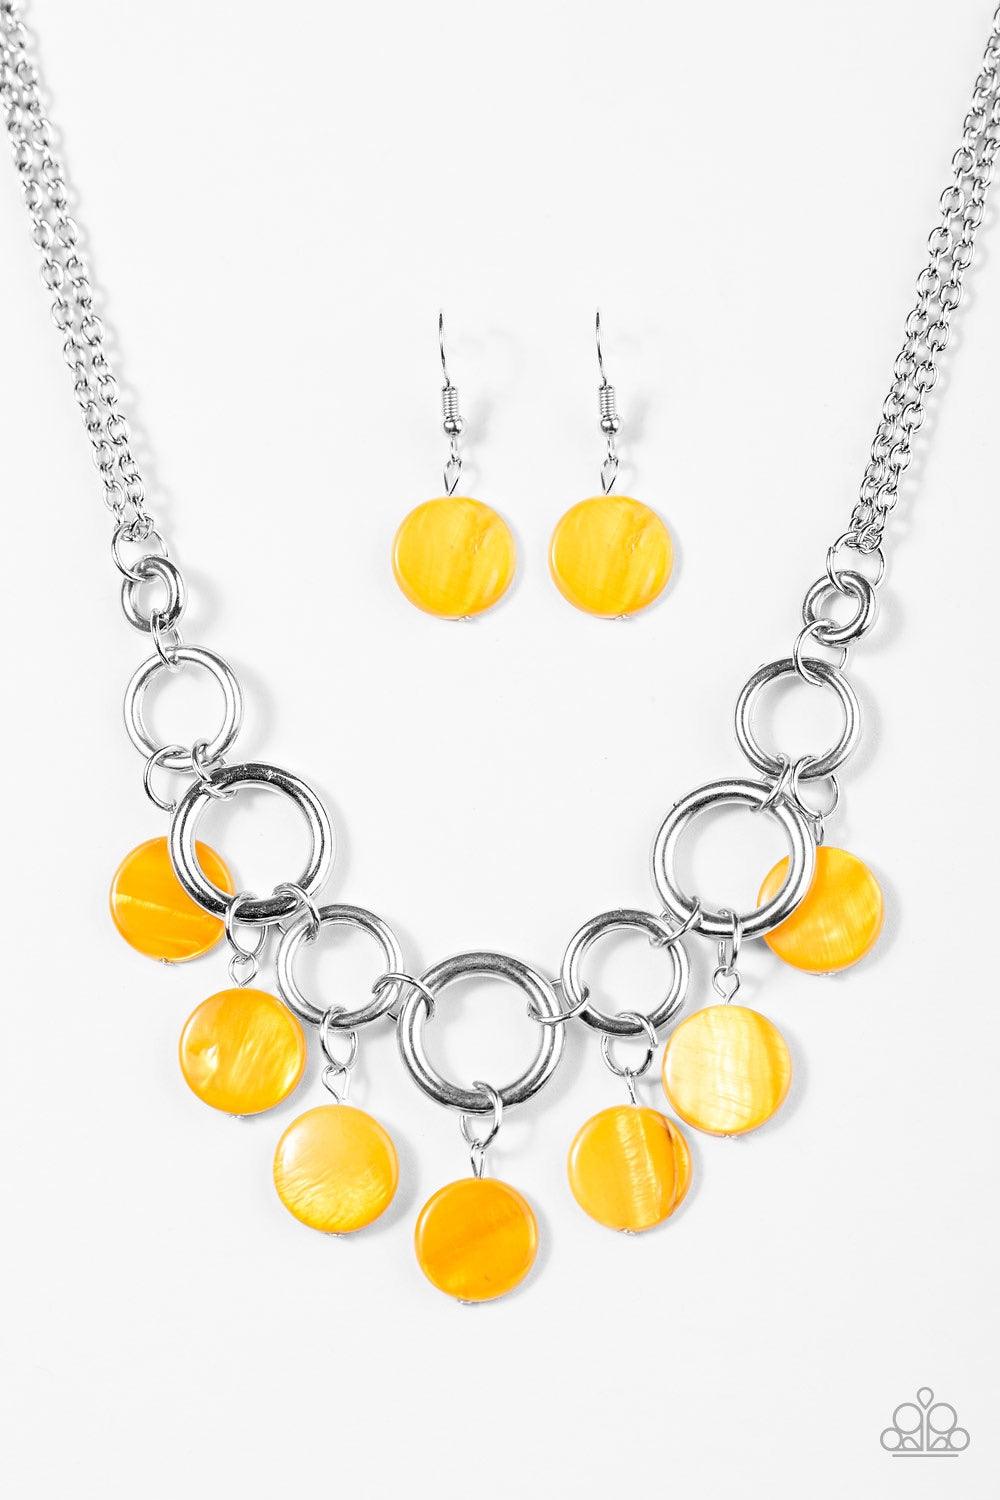 Paparazzi Accessories Coastal Adventure - Yellow Brushed in a shell-like iridescence, shiny yellow beading swings from the bottom of bold silver hoops, creating a colorful fringe below the collar. Features an adjustable clasp closure. Jewelry